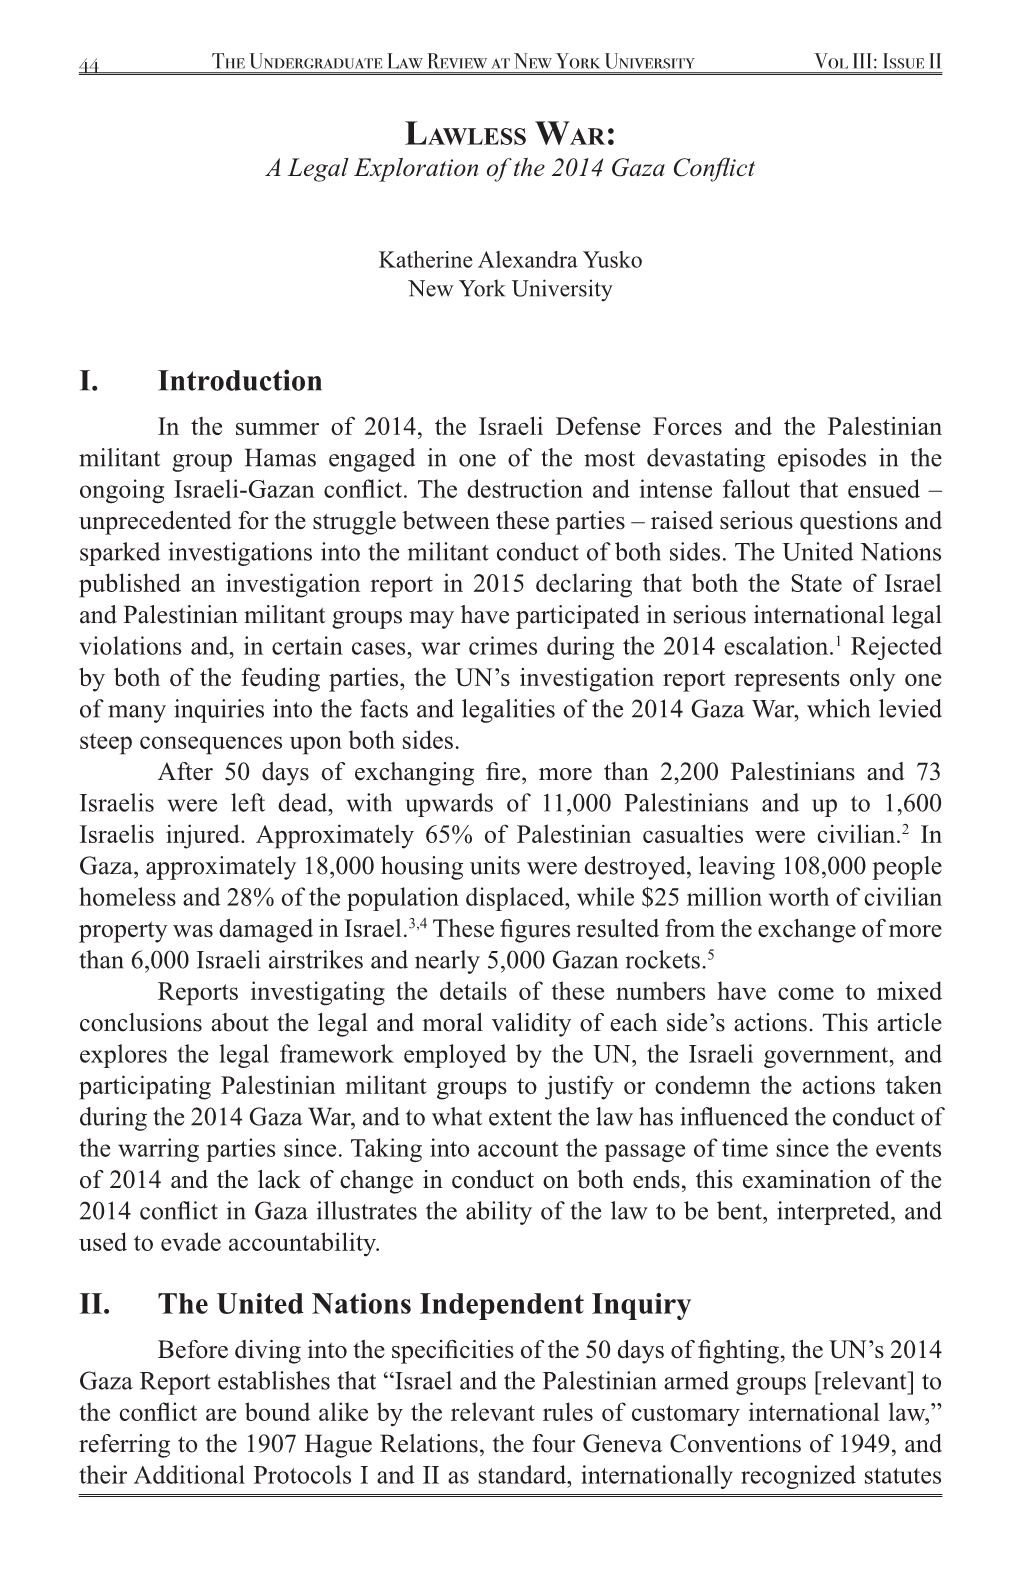 A Legal Exploration of the 2014 Gaza Conflict